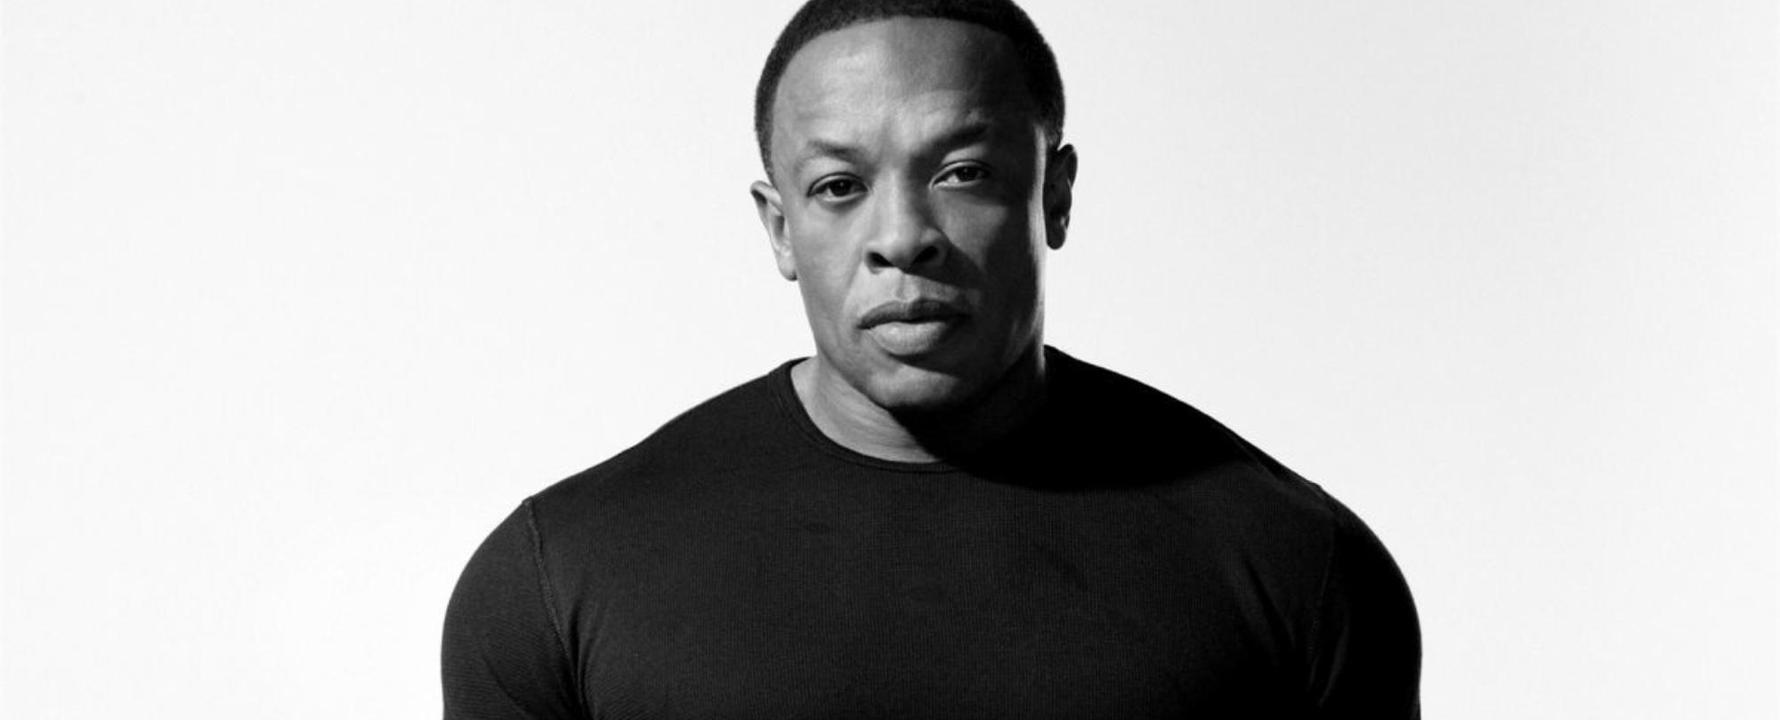 Promotional photograph of Dr. Dre.